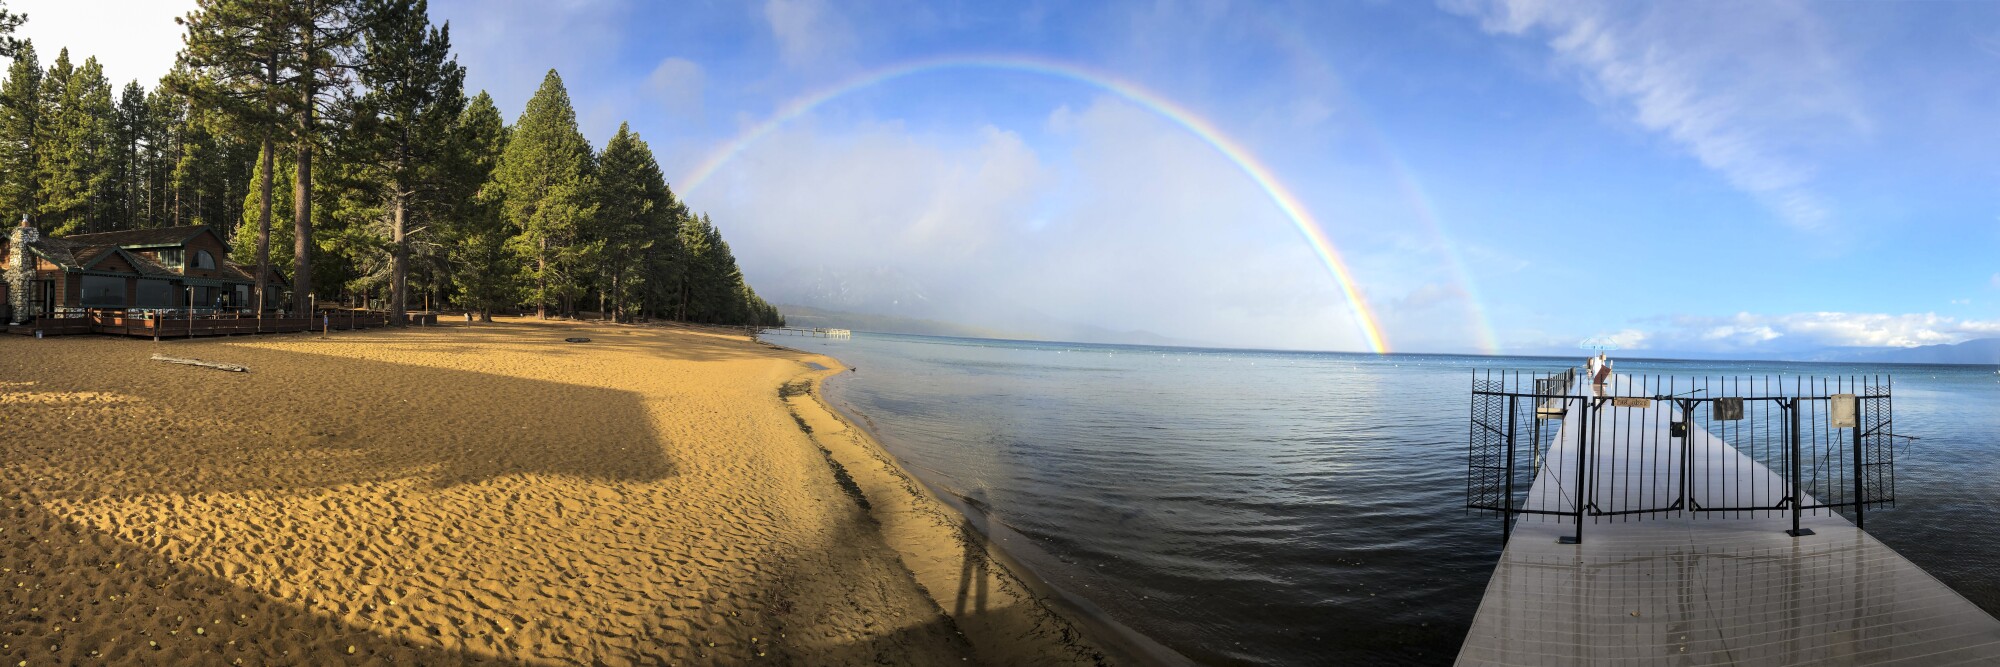 At Lake Tahoe, you sometimes catch a rainbow rising from the water or mushrooms rising from the forest floor.